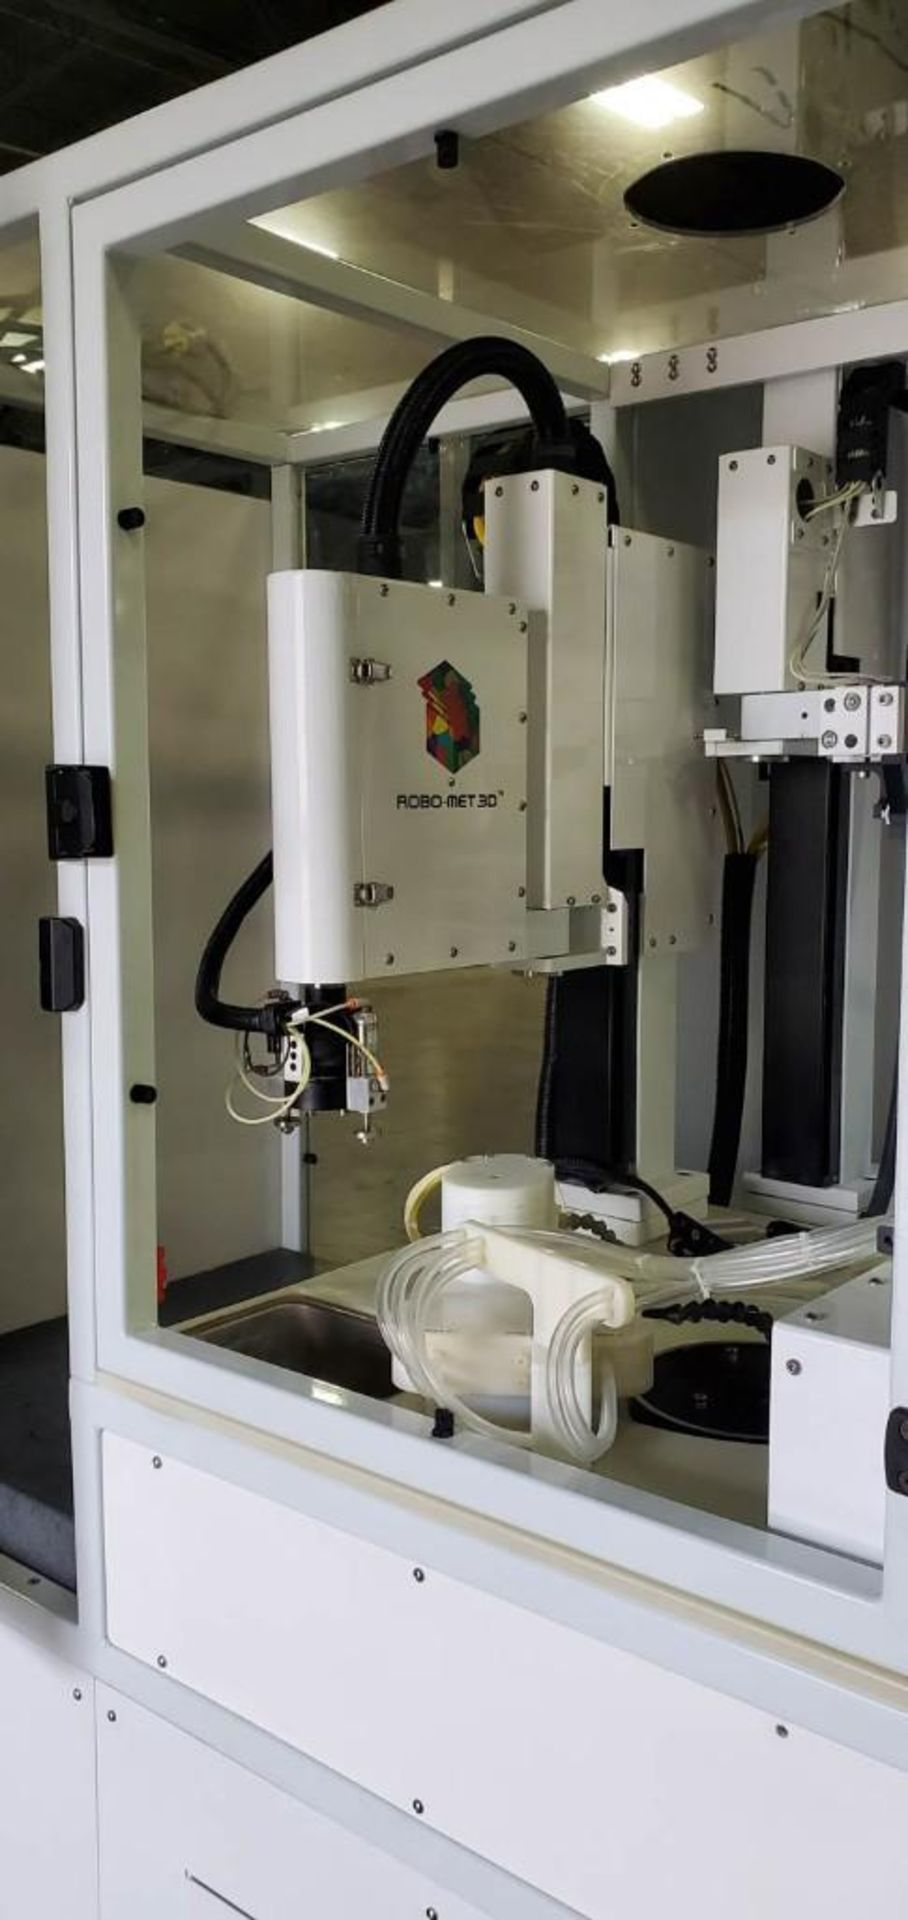 2013 UES Model Robomet 3D Automated Robotic Metallographic Preparation and 3D Photo System - Image 6 of 53